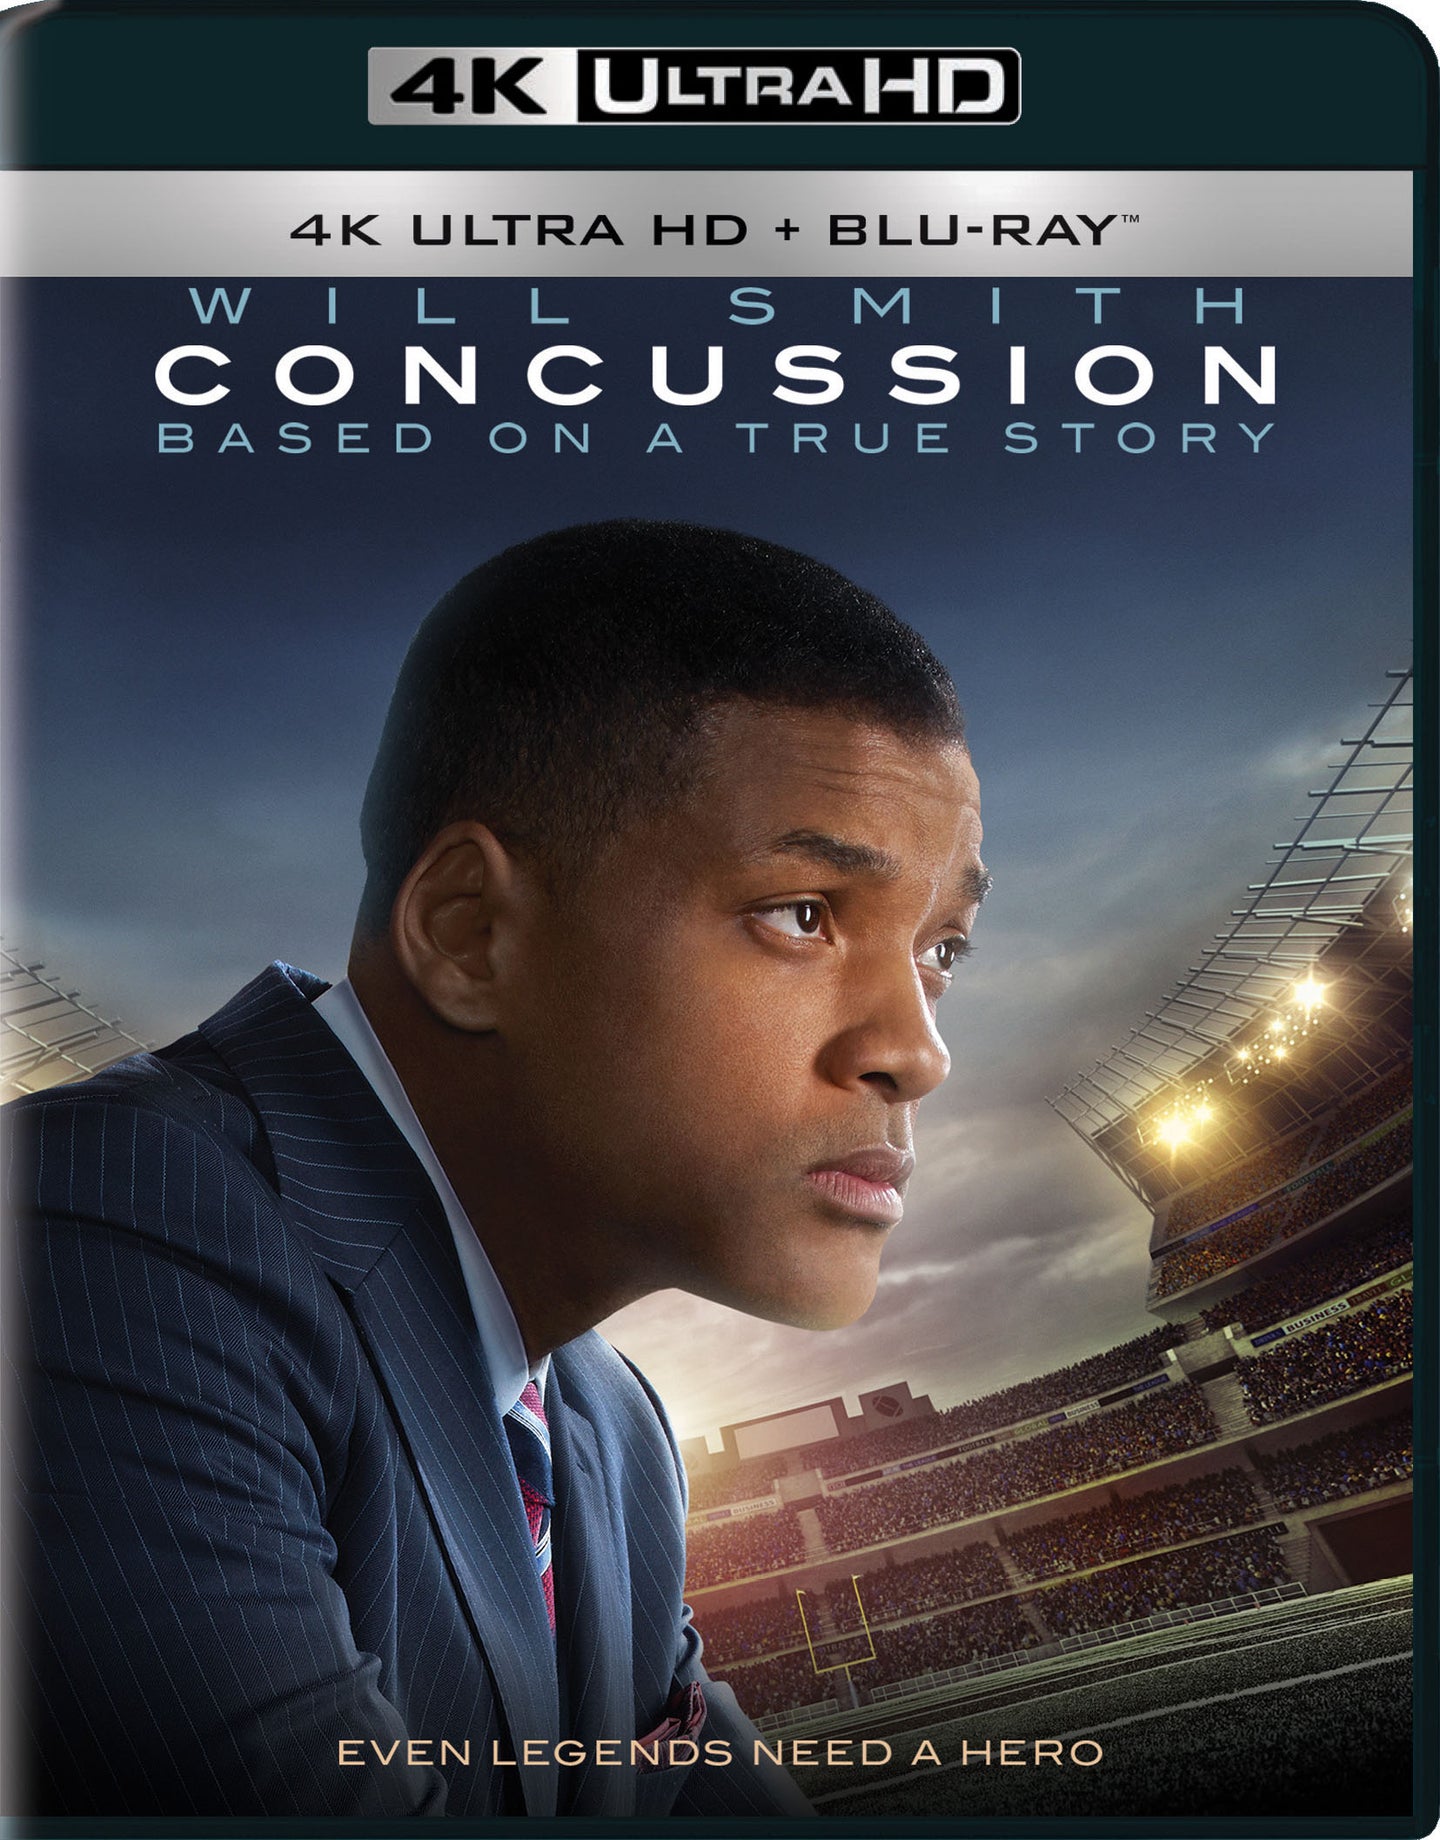 Concussion (2016) Vudu or Movies Anywhere 4K code